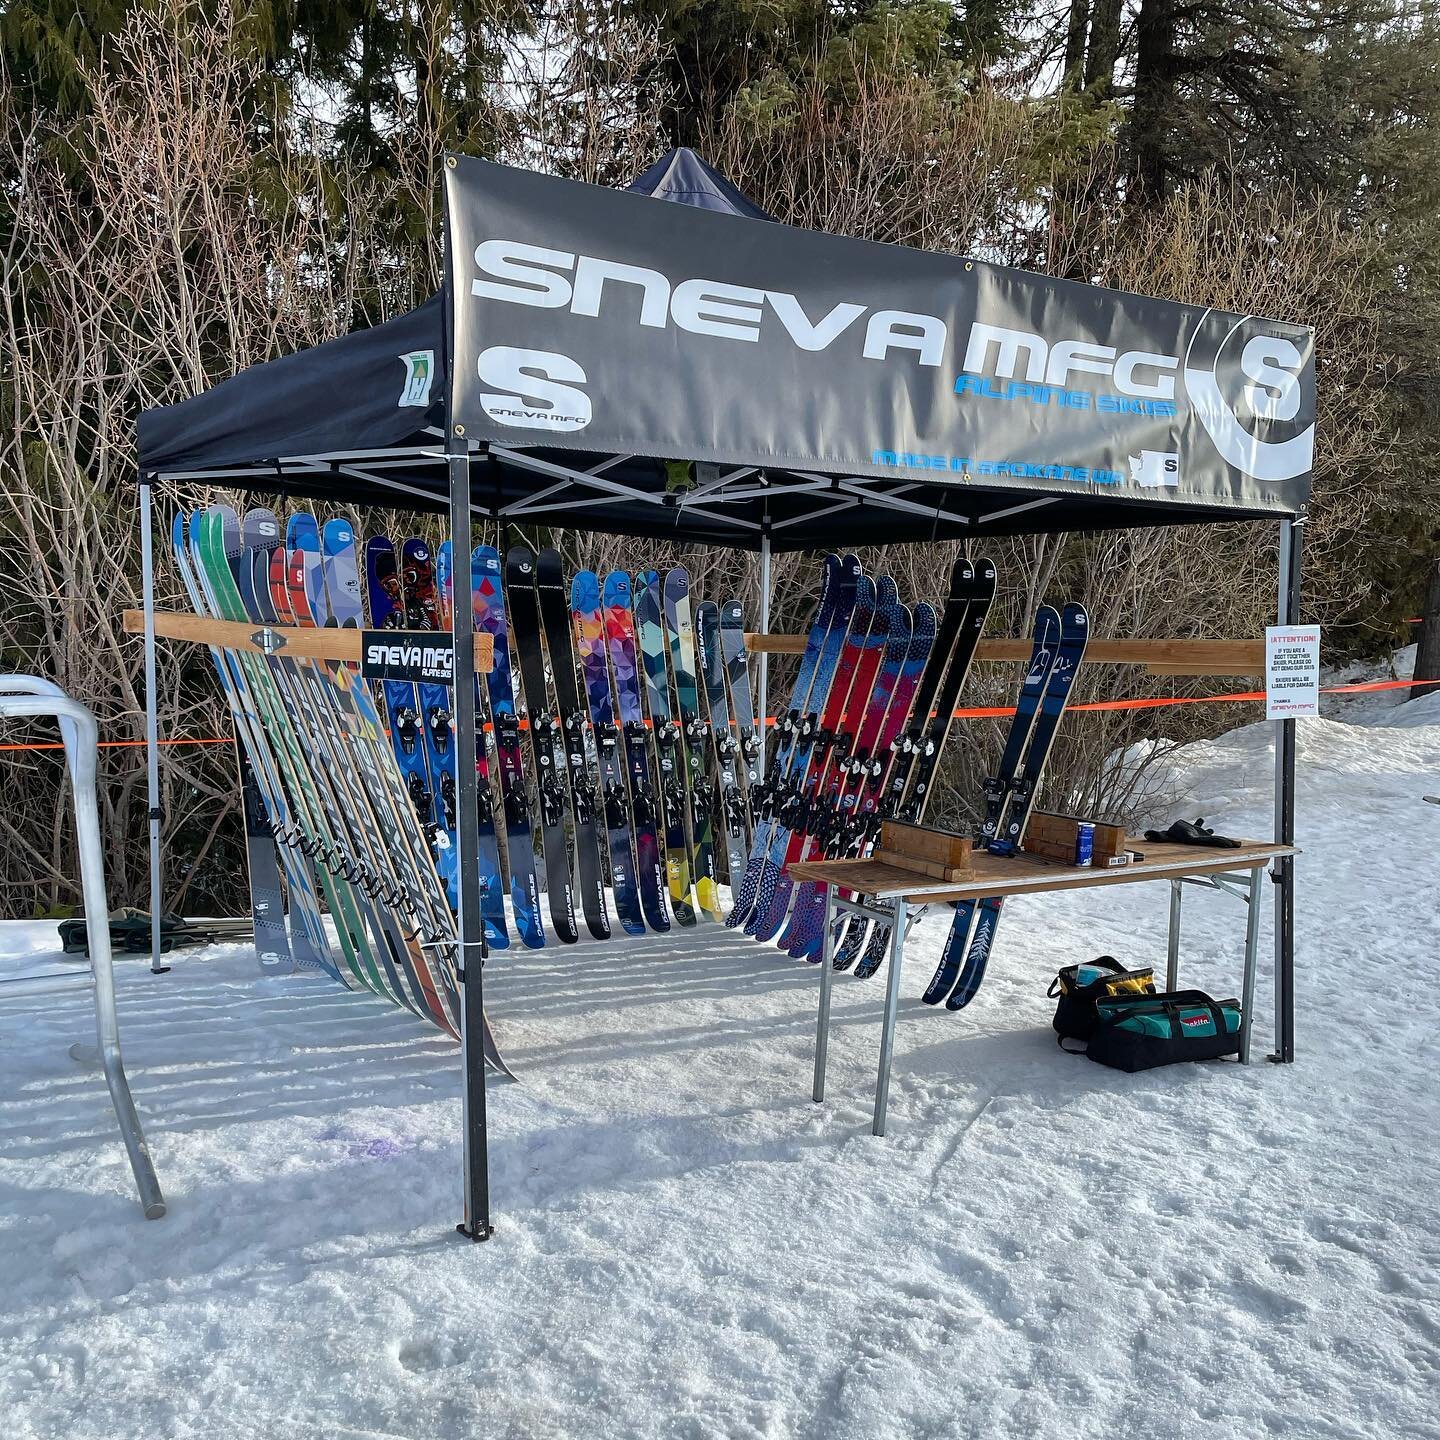 Demo day @49degreesnorth should be a great day! Come up and ski #snevamfg #pnw #ski